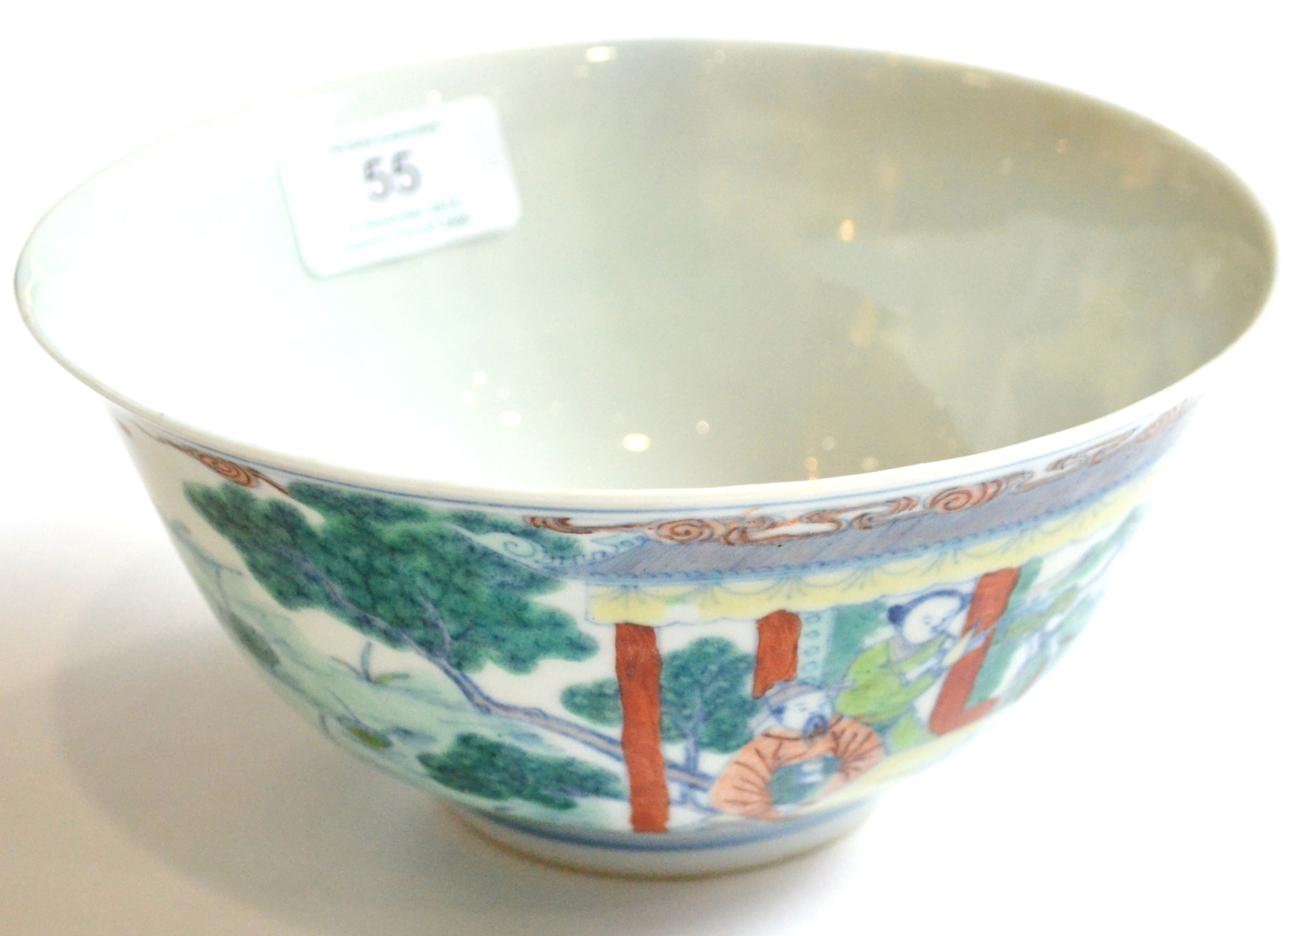 A Chinese Wucai Porcelain Bowl, Yongzheng reign mark but not of the period, painted with a